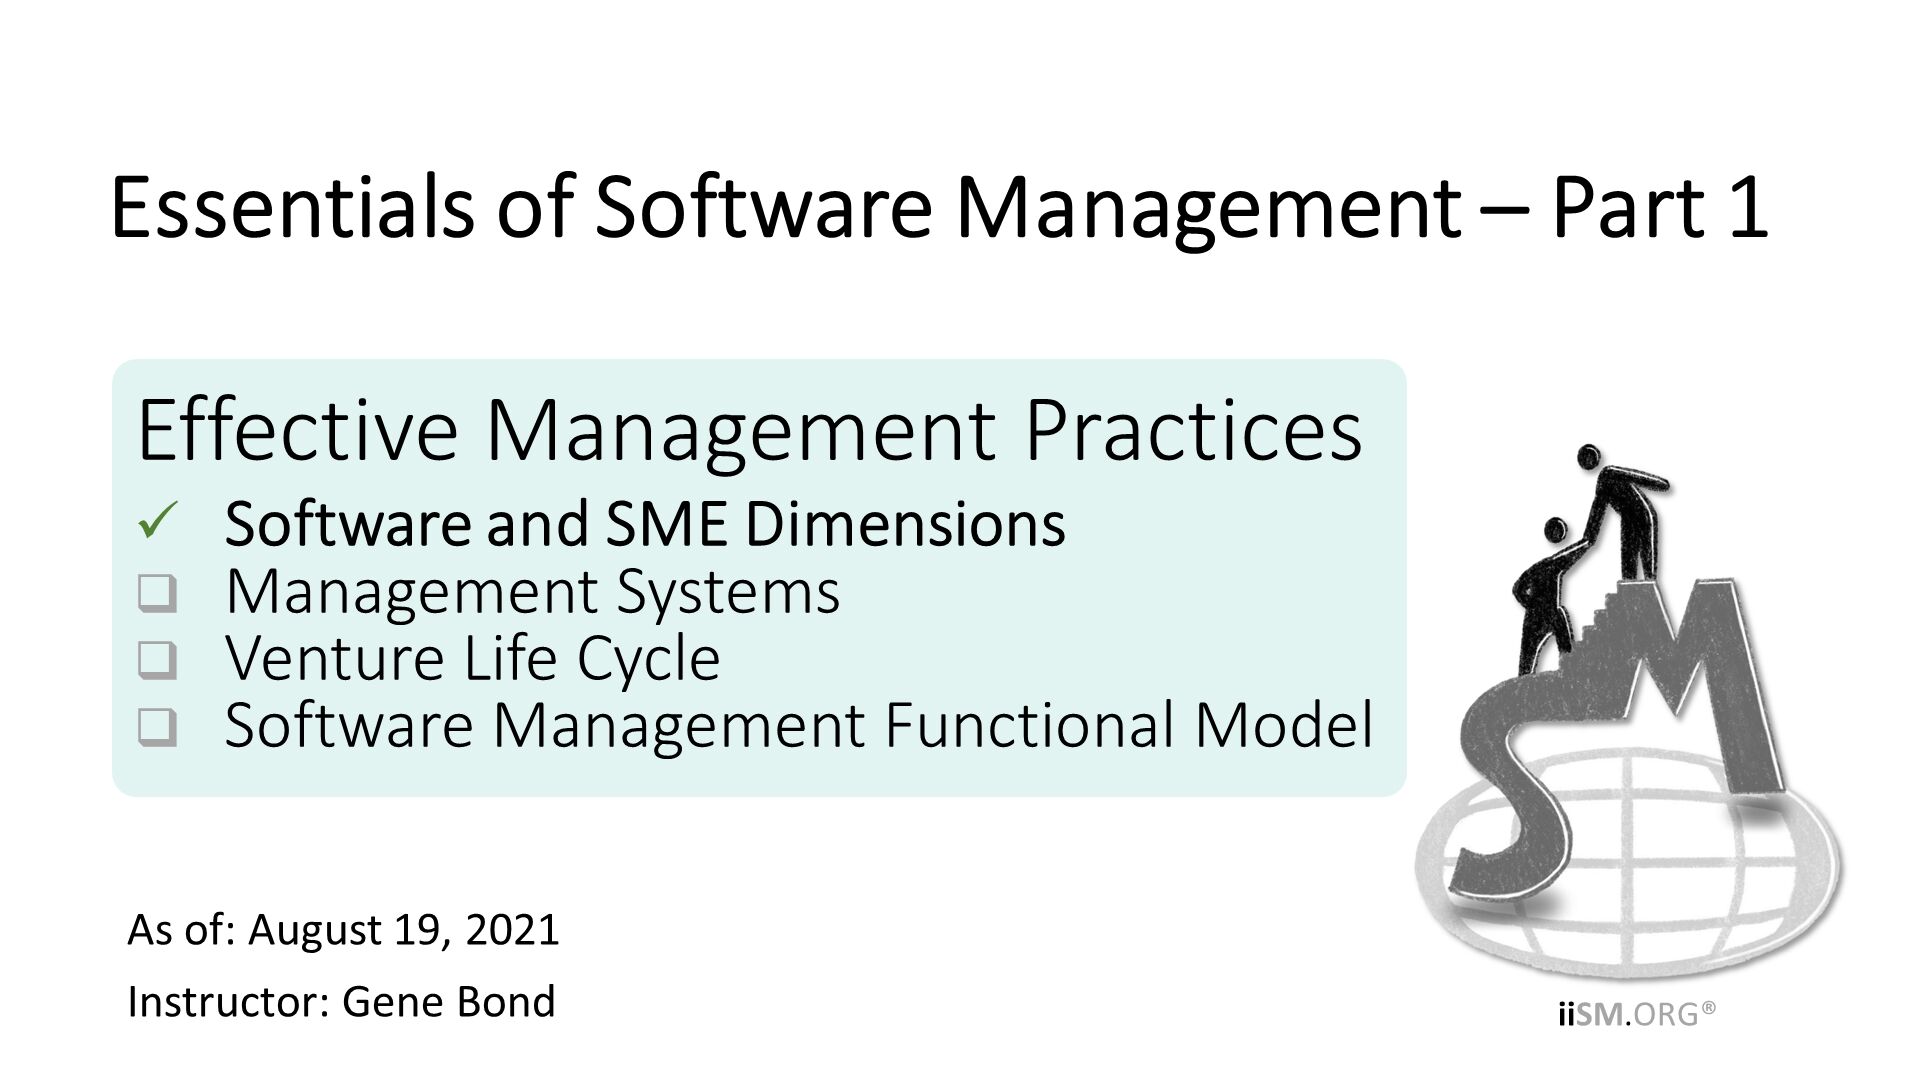 Effective Management Practices
Software and SME Dimensions
Management Systems
Venture Life Cycle
Software Management Functional Model. As of: August 19, 2021
Instructor: Gene Bond
. Essentials of Software Management – Part 1. 